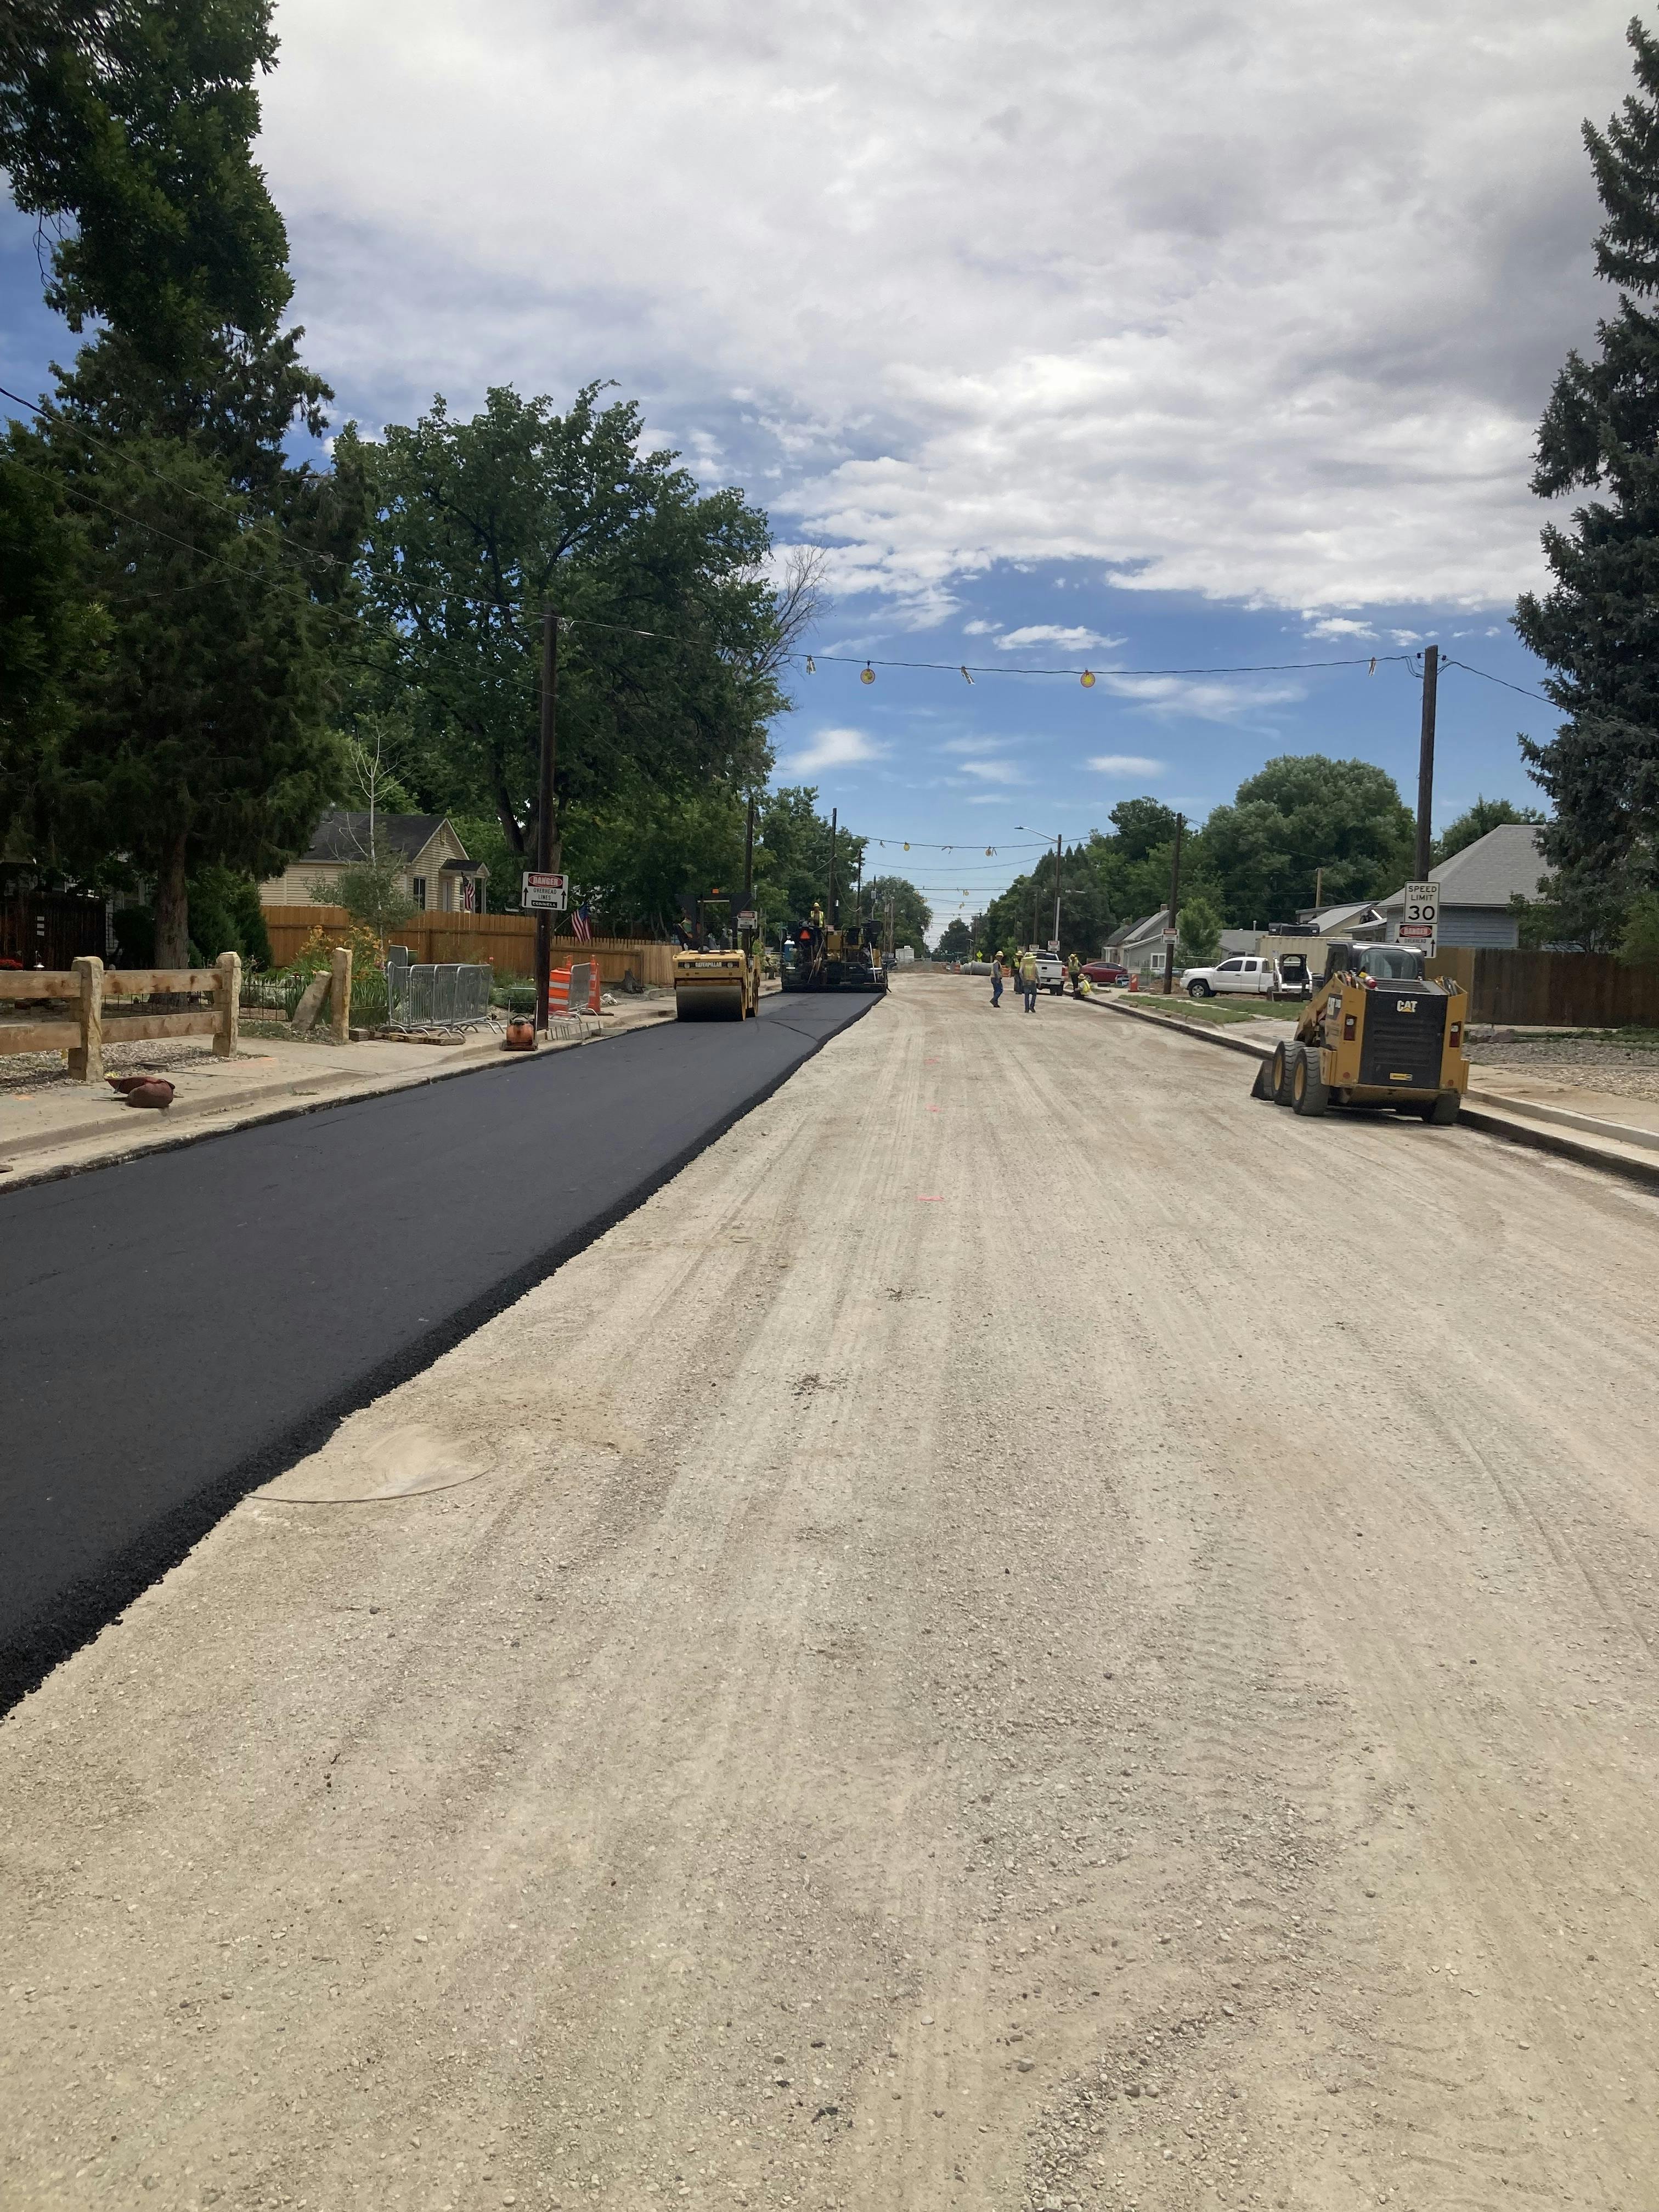 Paving activities on W. 1st Street, west of N. Harrison Ave.